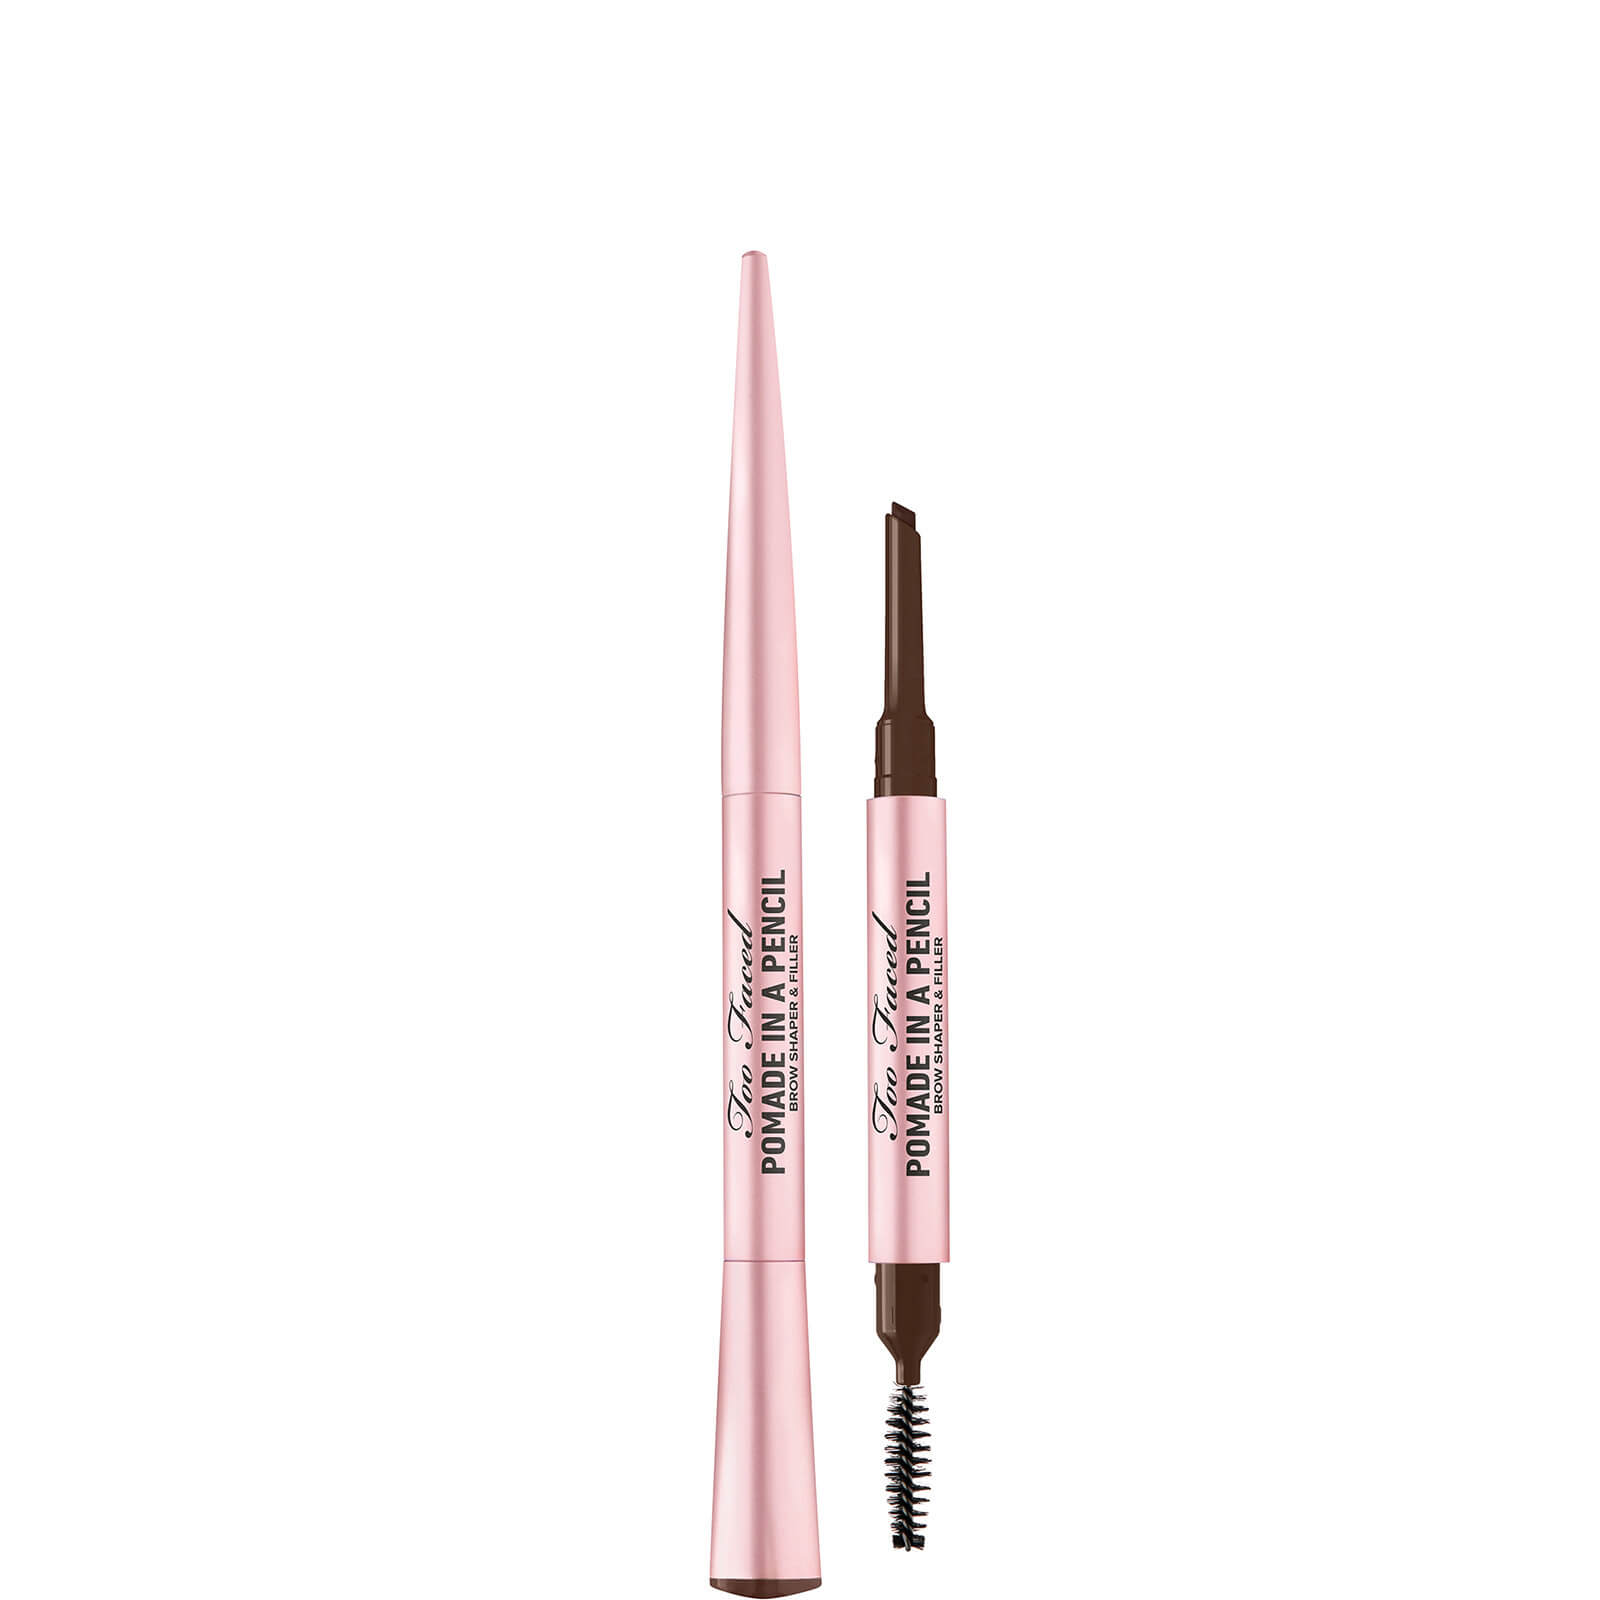 Too Faced Brow Pomade in a Pencil 0.19g (Various Shades) - Espresso